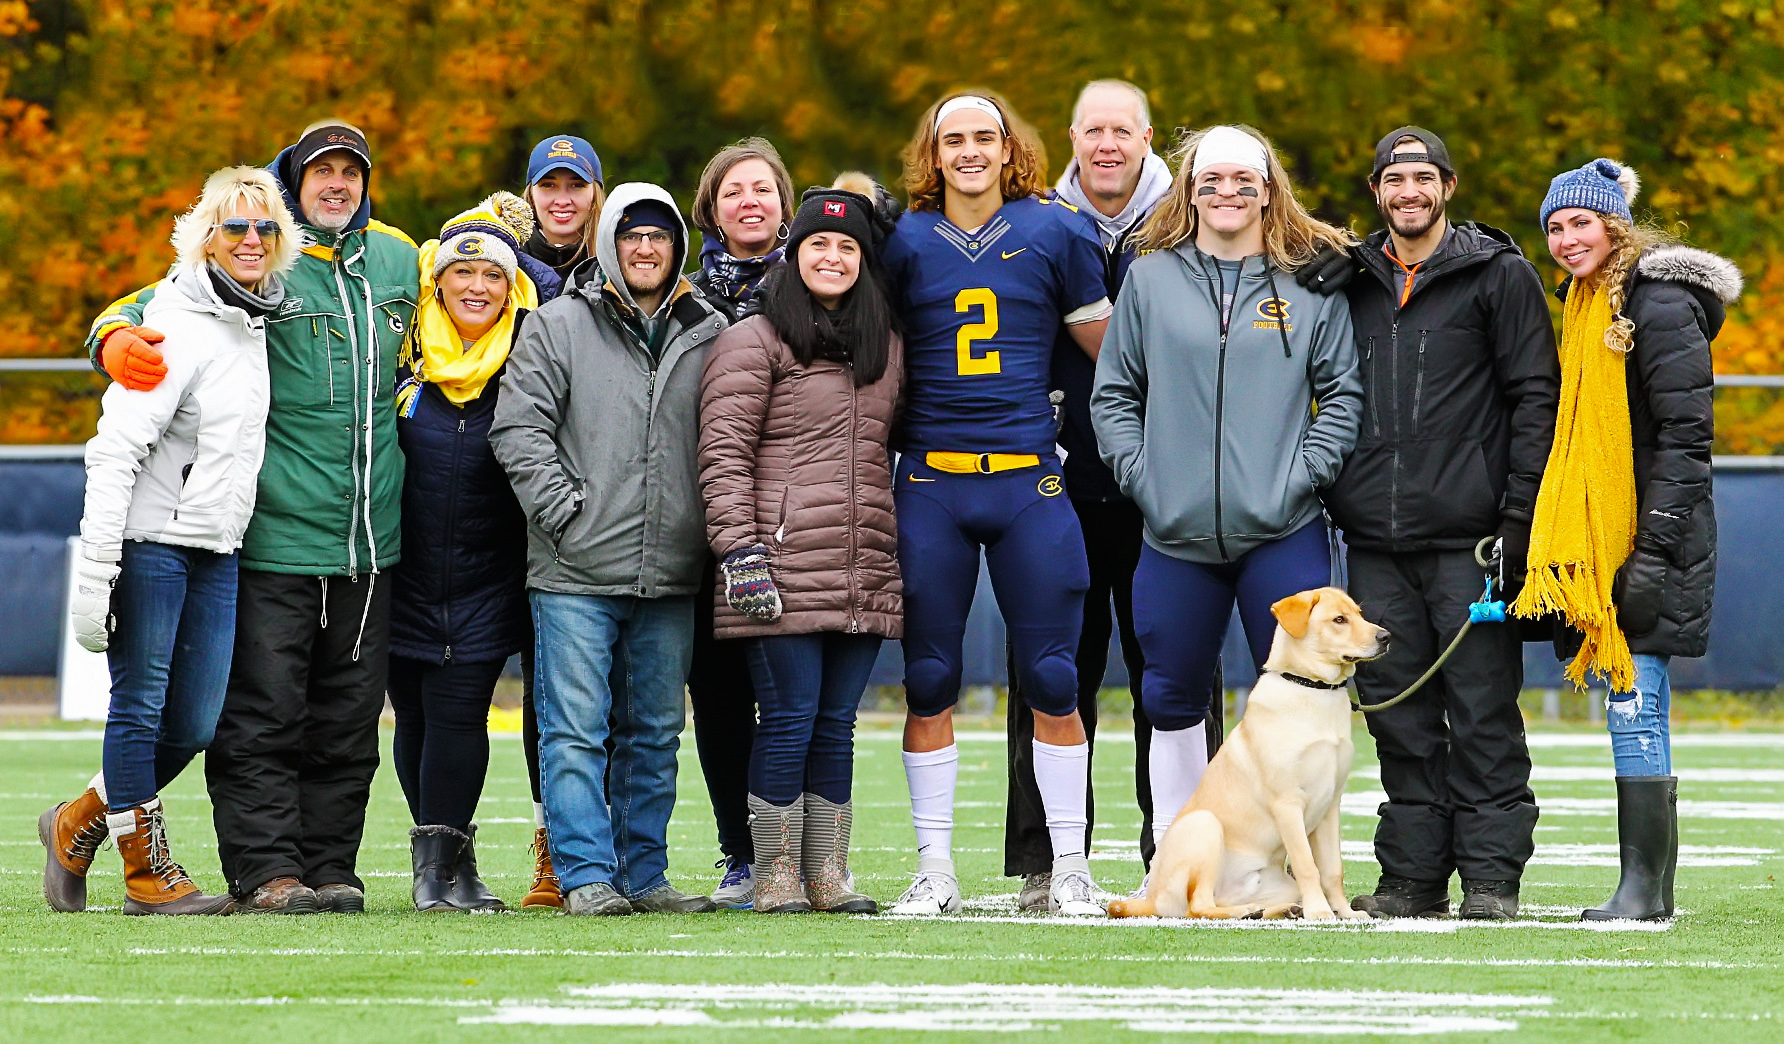 Blugold Game Day - A Family Affair for the Burzynski Family